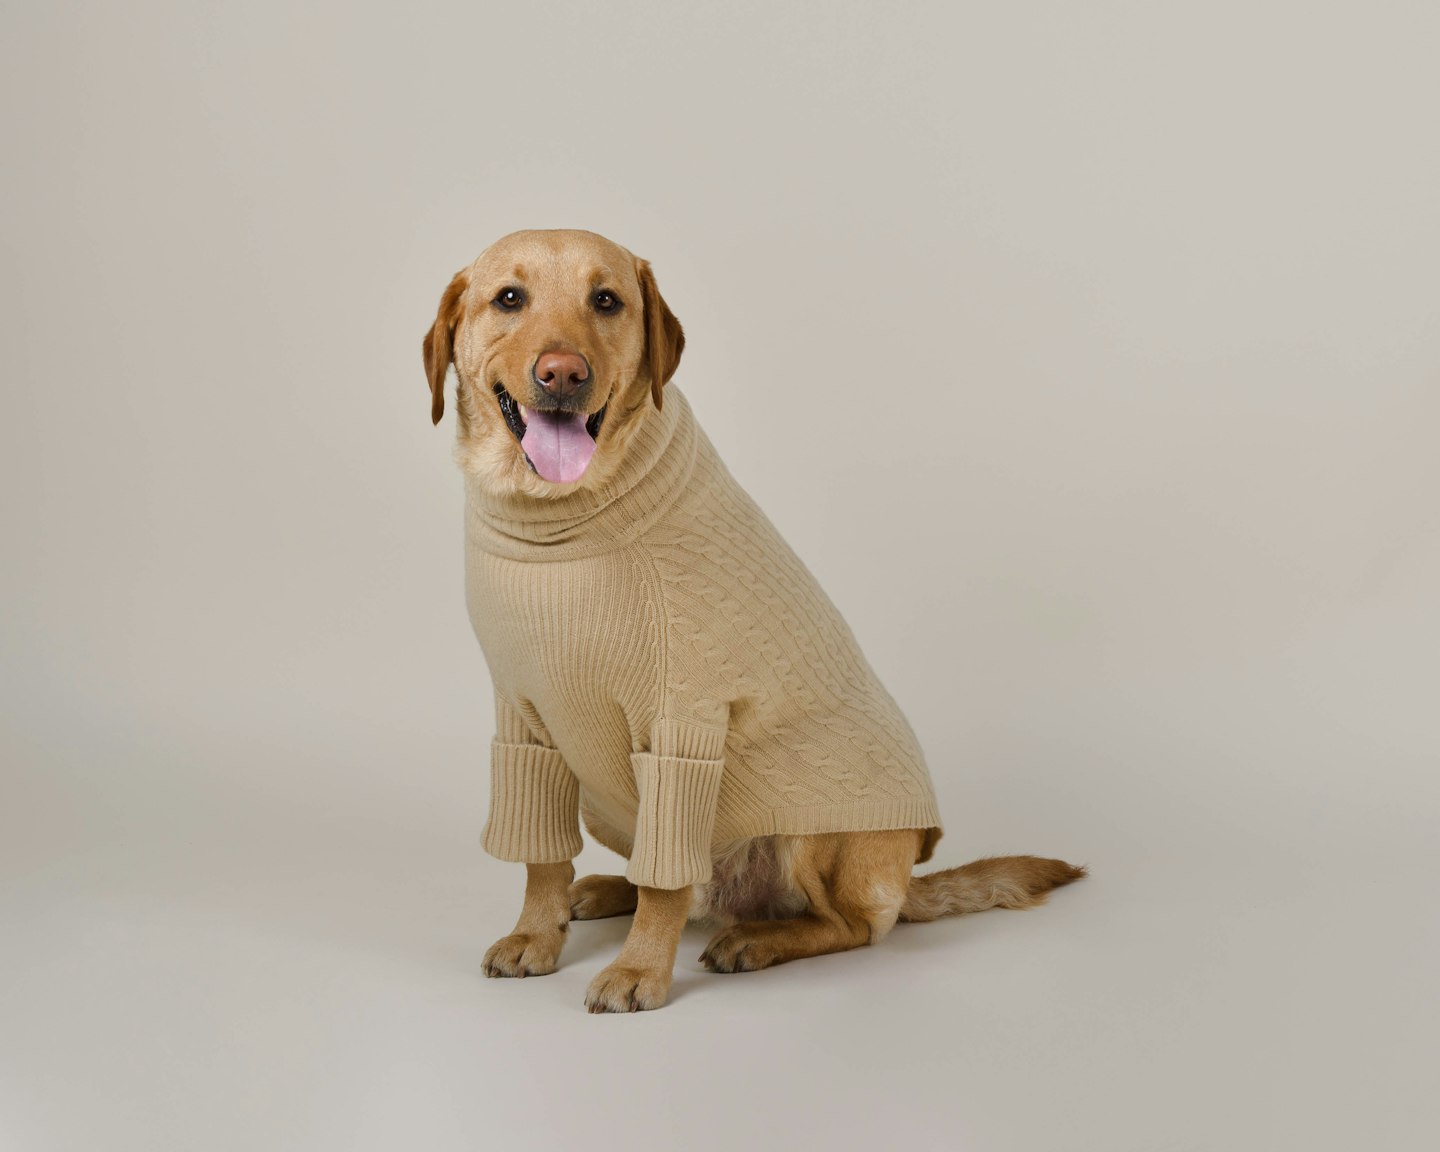 Pawshmere, The Pablo Knit,  £130